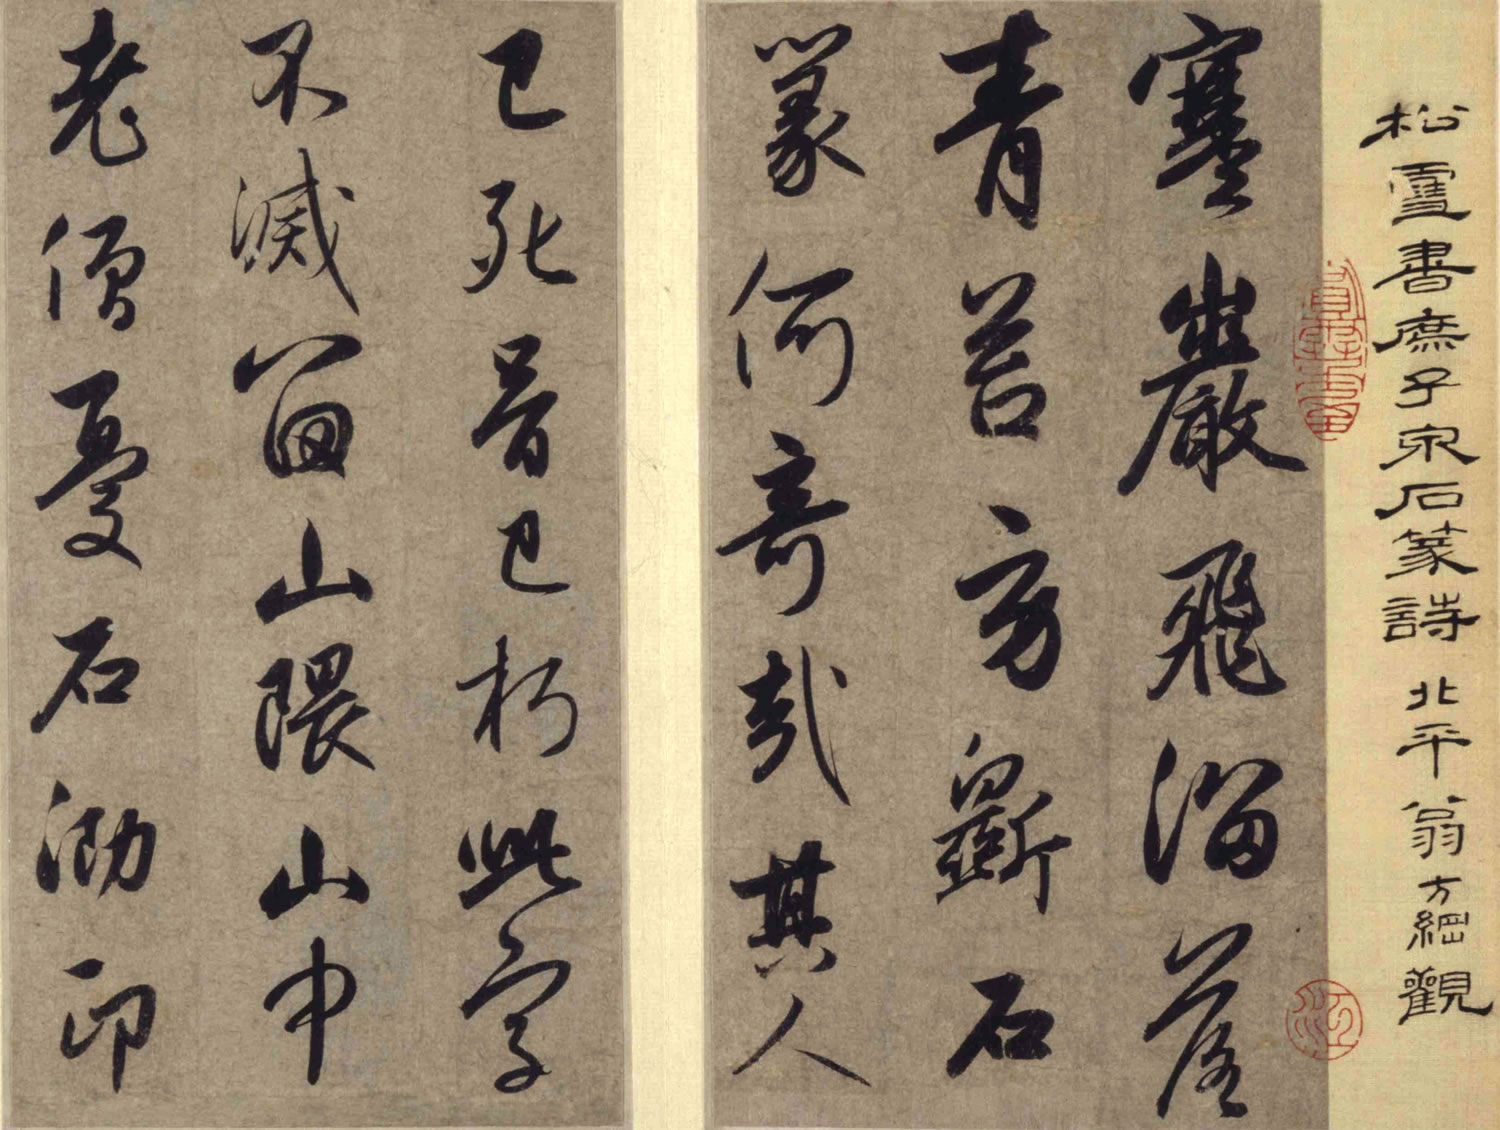 Poem on the Shuzi Spring stone carving in running script